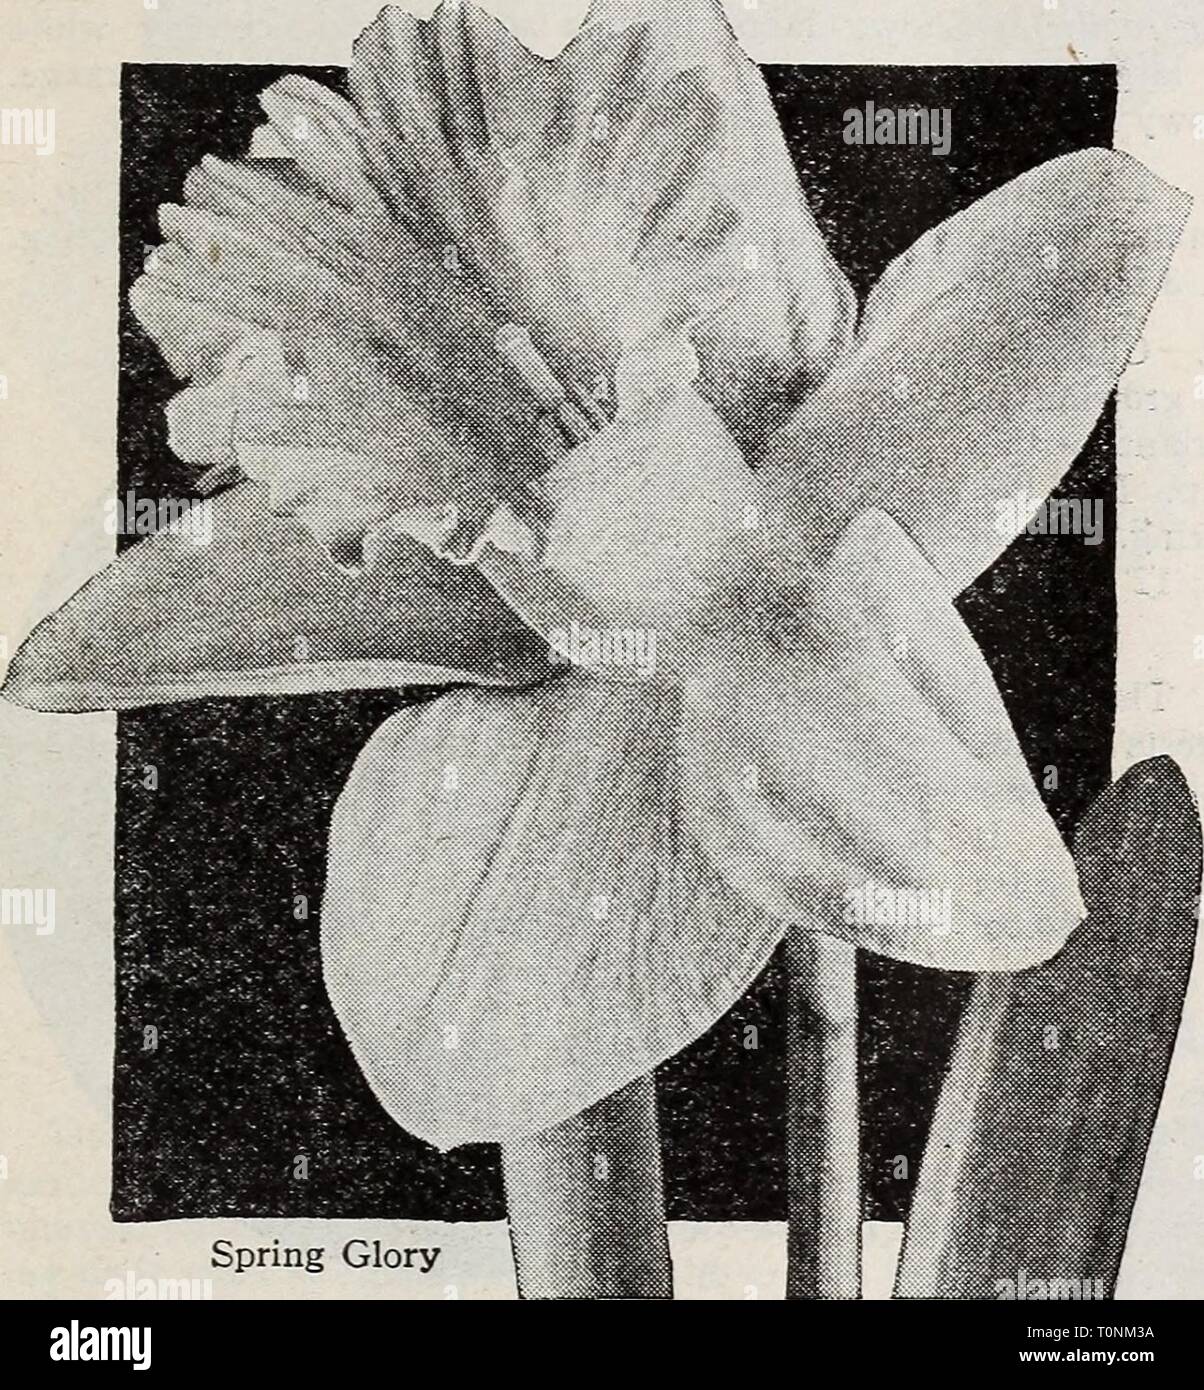 Dreer's bulbs plants, shrubs and Dreer's bulbs plants, shrubs and seeds for fall planting : autumn 1937  dreersbulbsplant1937henr Year: 1937  Narcissus or Daffodils Prince of Wales. A showy, well-formed flower of bold and stately appearance. The color is a lovely uniform light yellow that gives a splendid contrast against the vigorous rich green foliage. 3 for 45c; 12 for $1.50; 100 for $10.00. Robert Sydenham. Massive, well-proportioned blooms with wide overlapping perianth petals of a clear yellow with a very large, well expanded and nicely frilled golden yellow trumpet. Grows 18 to 20 inche Stock Photo